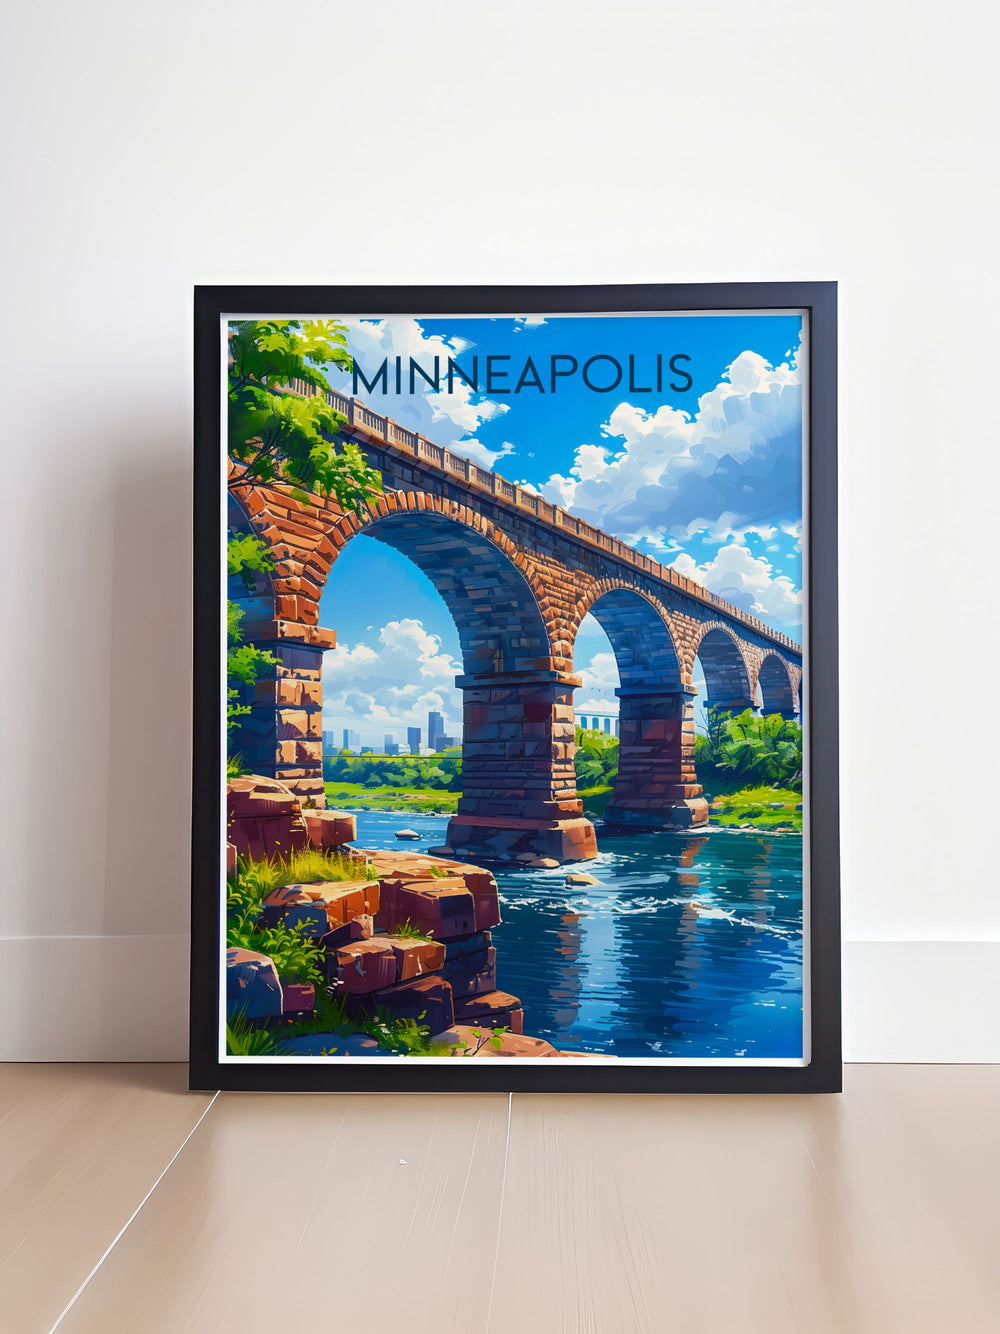 Featuring the scenic views of the Stone Arch Bridge, this poster offers a visual representation of one of Minneapoliss most beautiful historic landmarks, ideal for architecture and history enthusiasts.